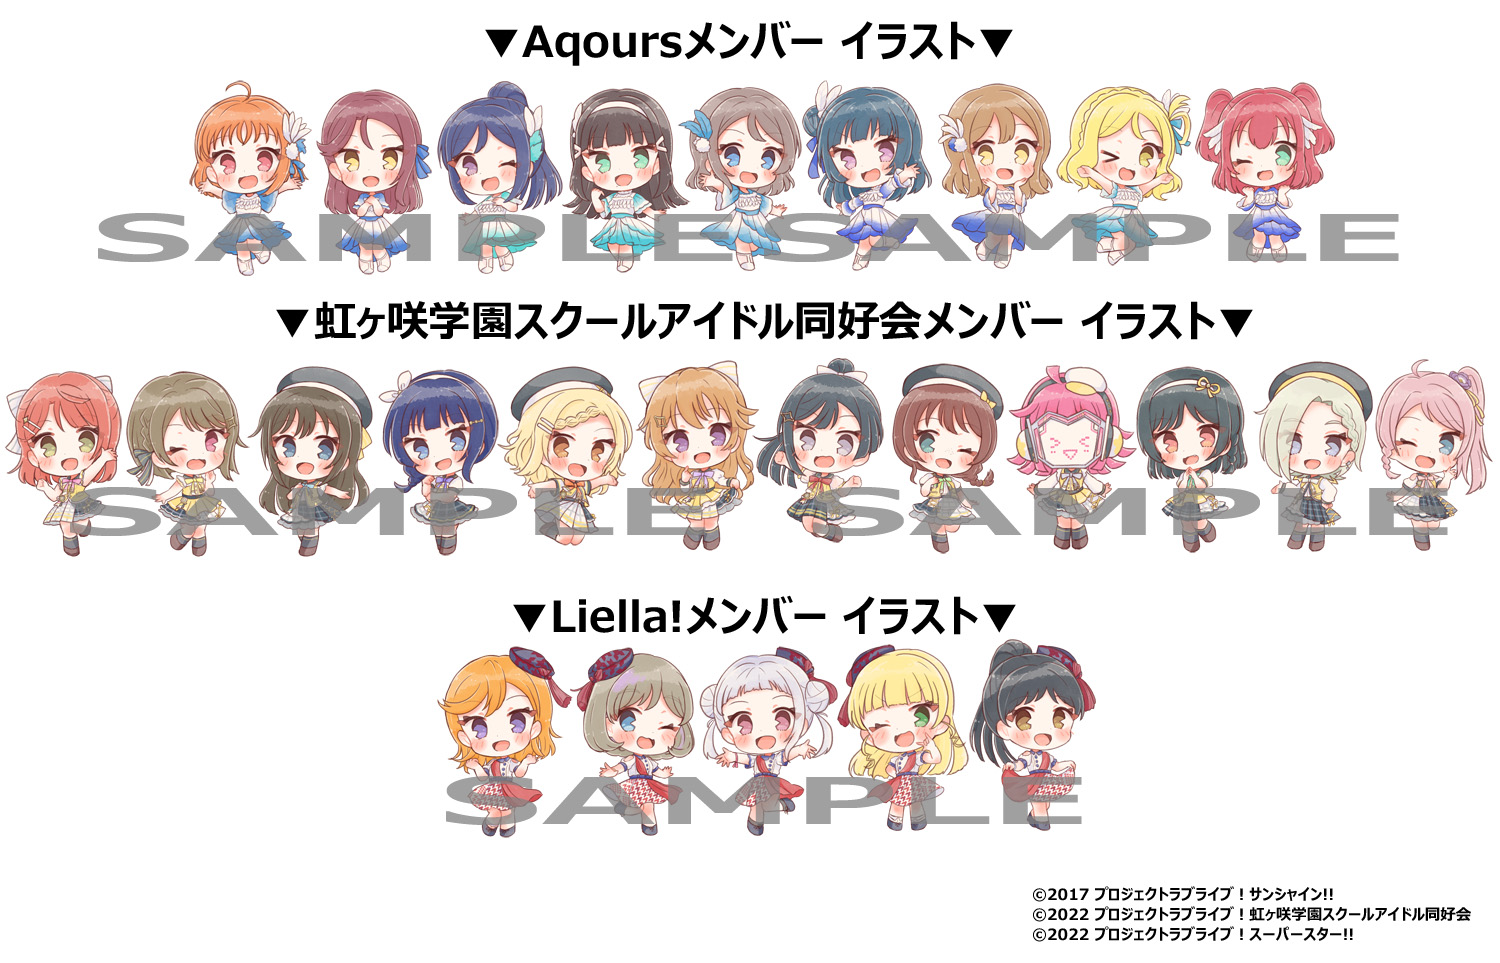 gLoveLiveI Series Presents COUNTDOWN LoveLiveI 20212022～LIVE with a smileI～ Blu-ray Memorial BOXh09/14 YouTube>1{ ->摜>4 